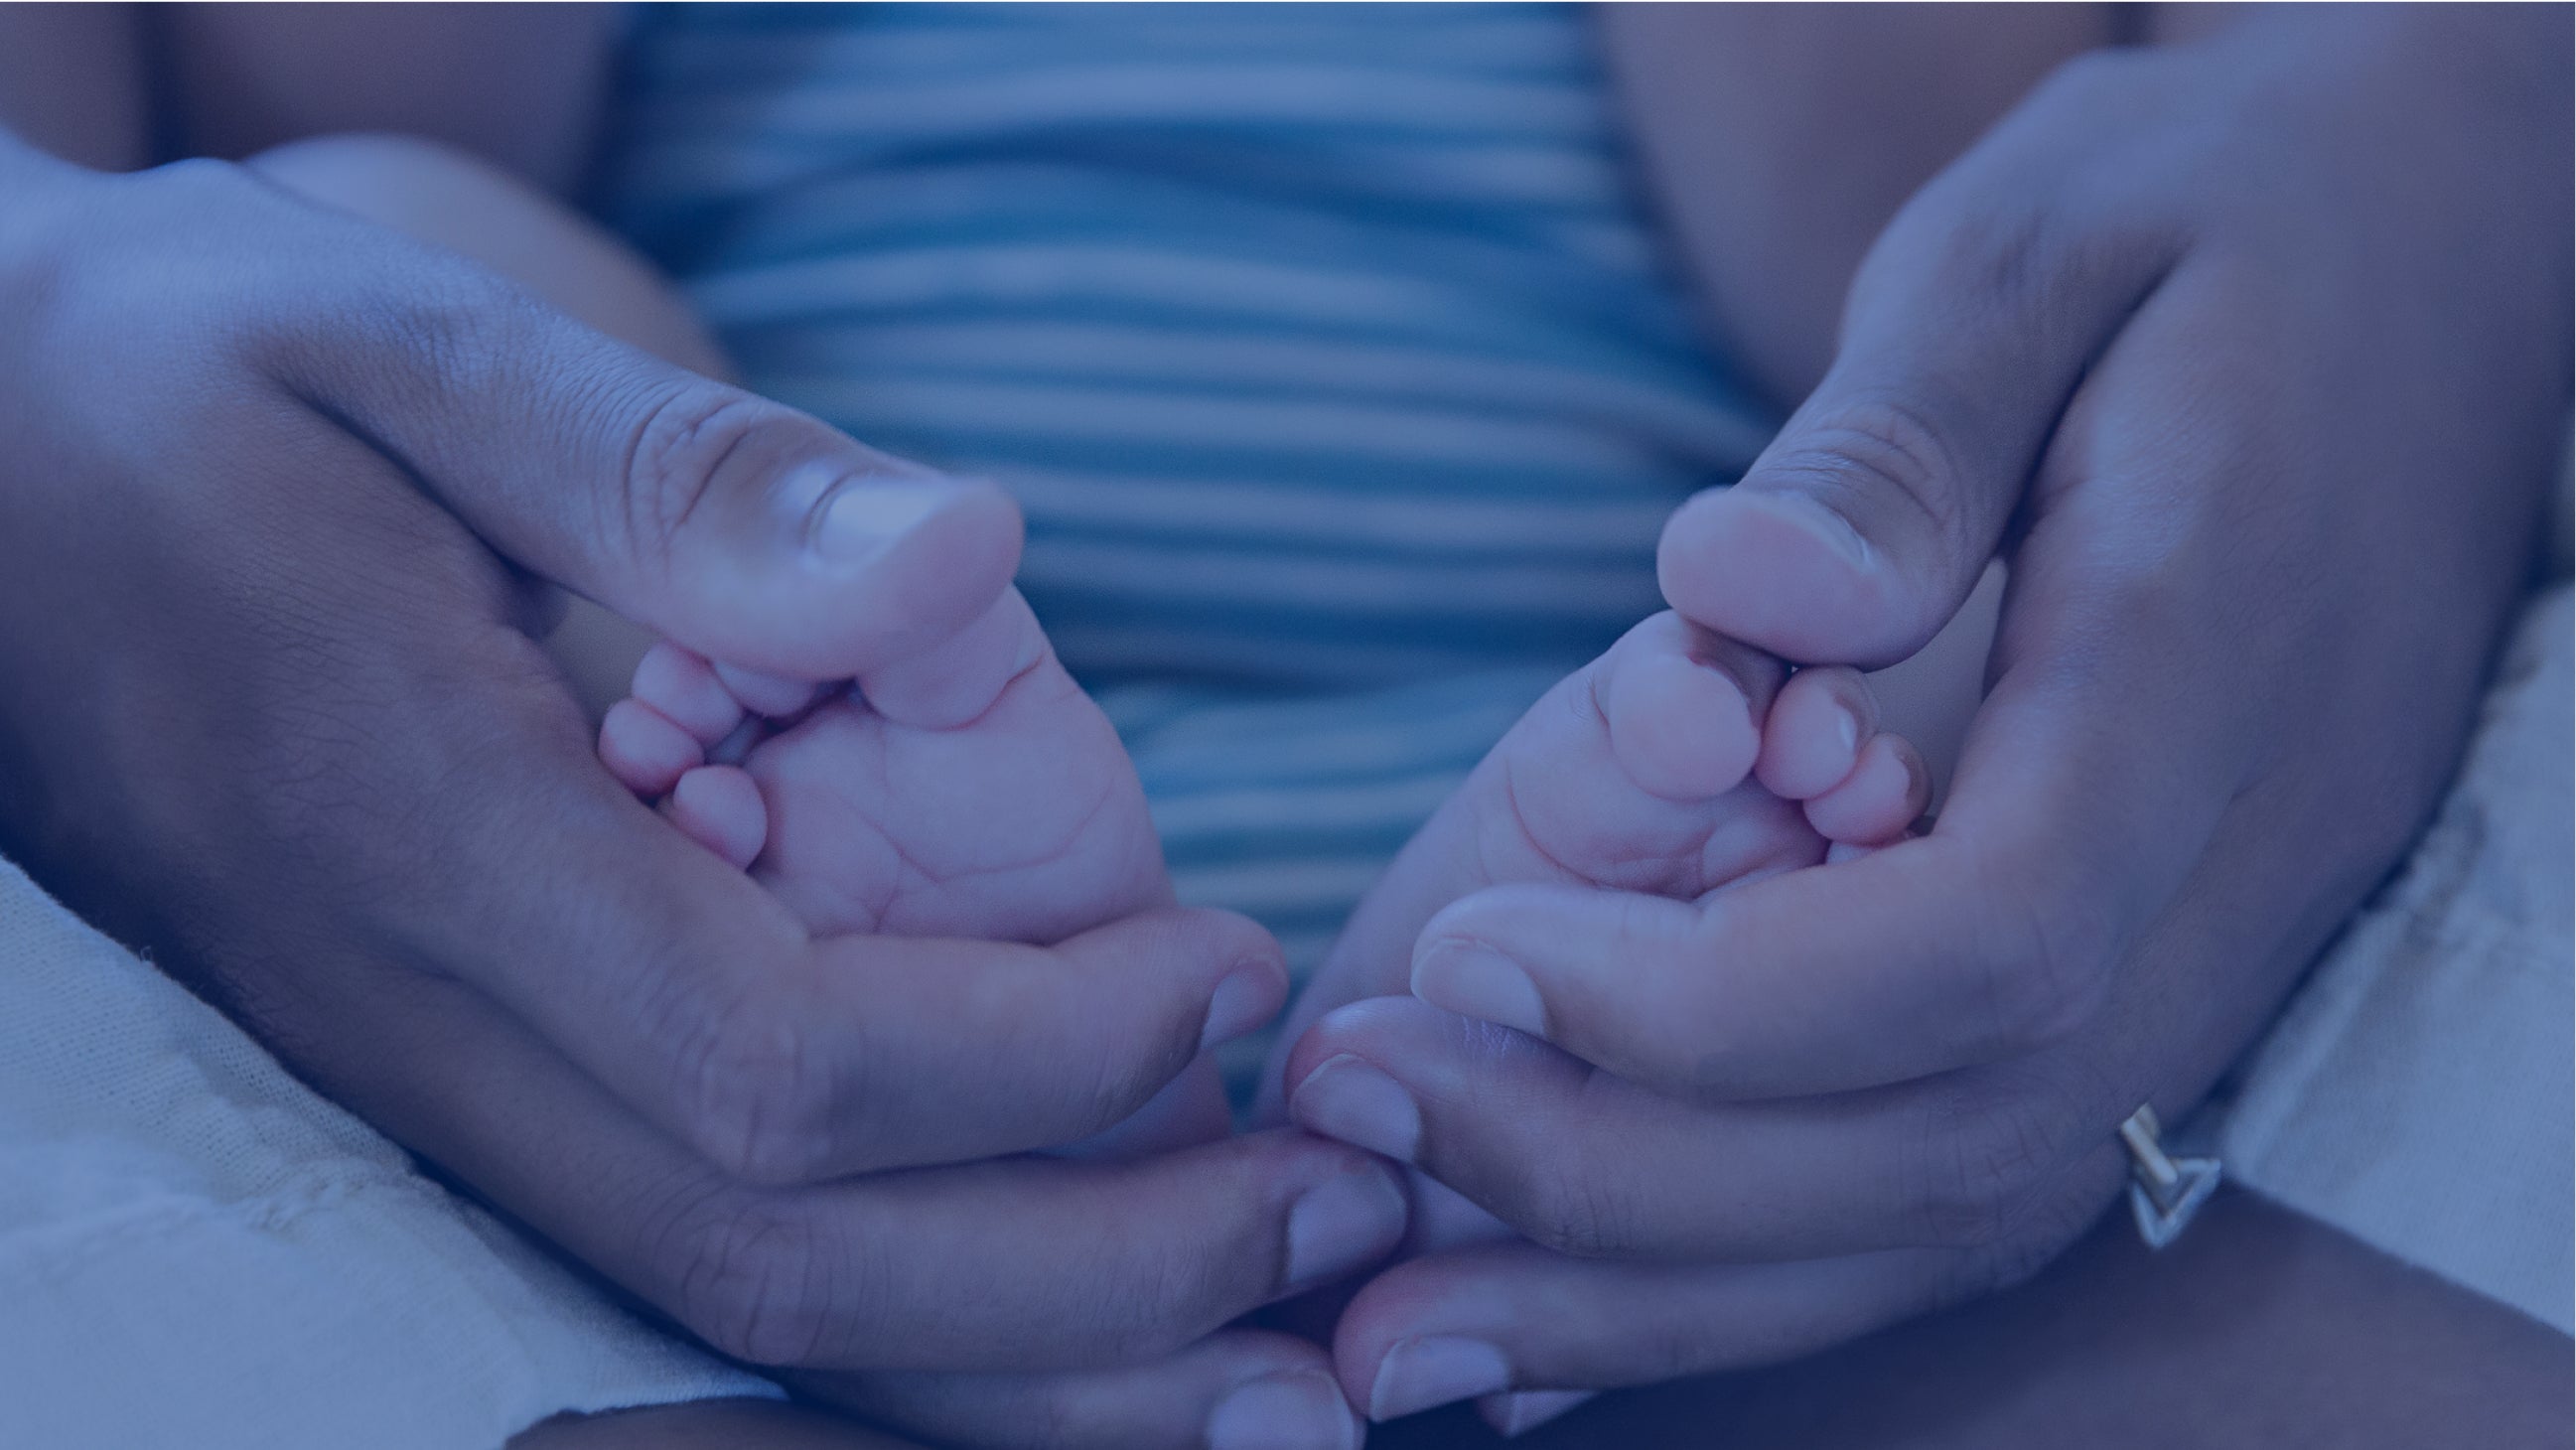 Infant's feet being held by a parent's hands